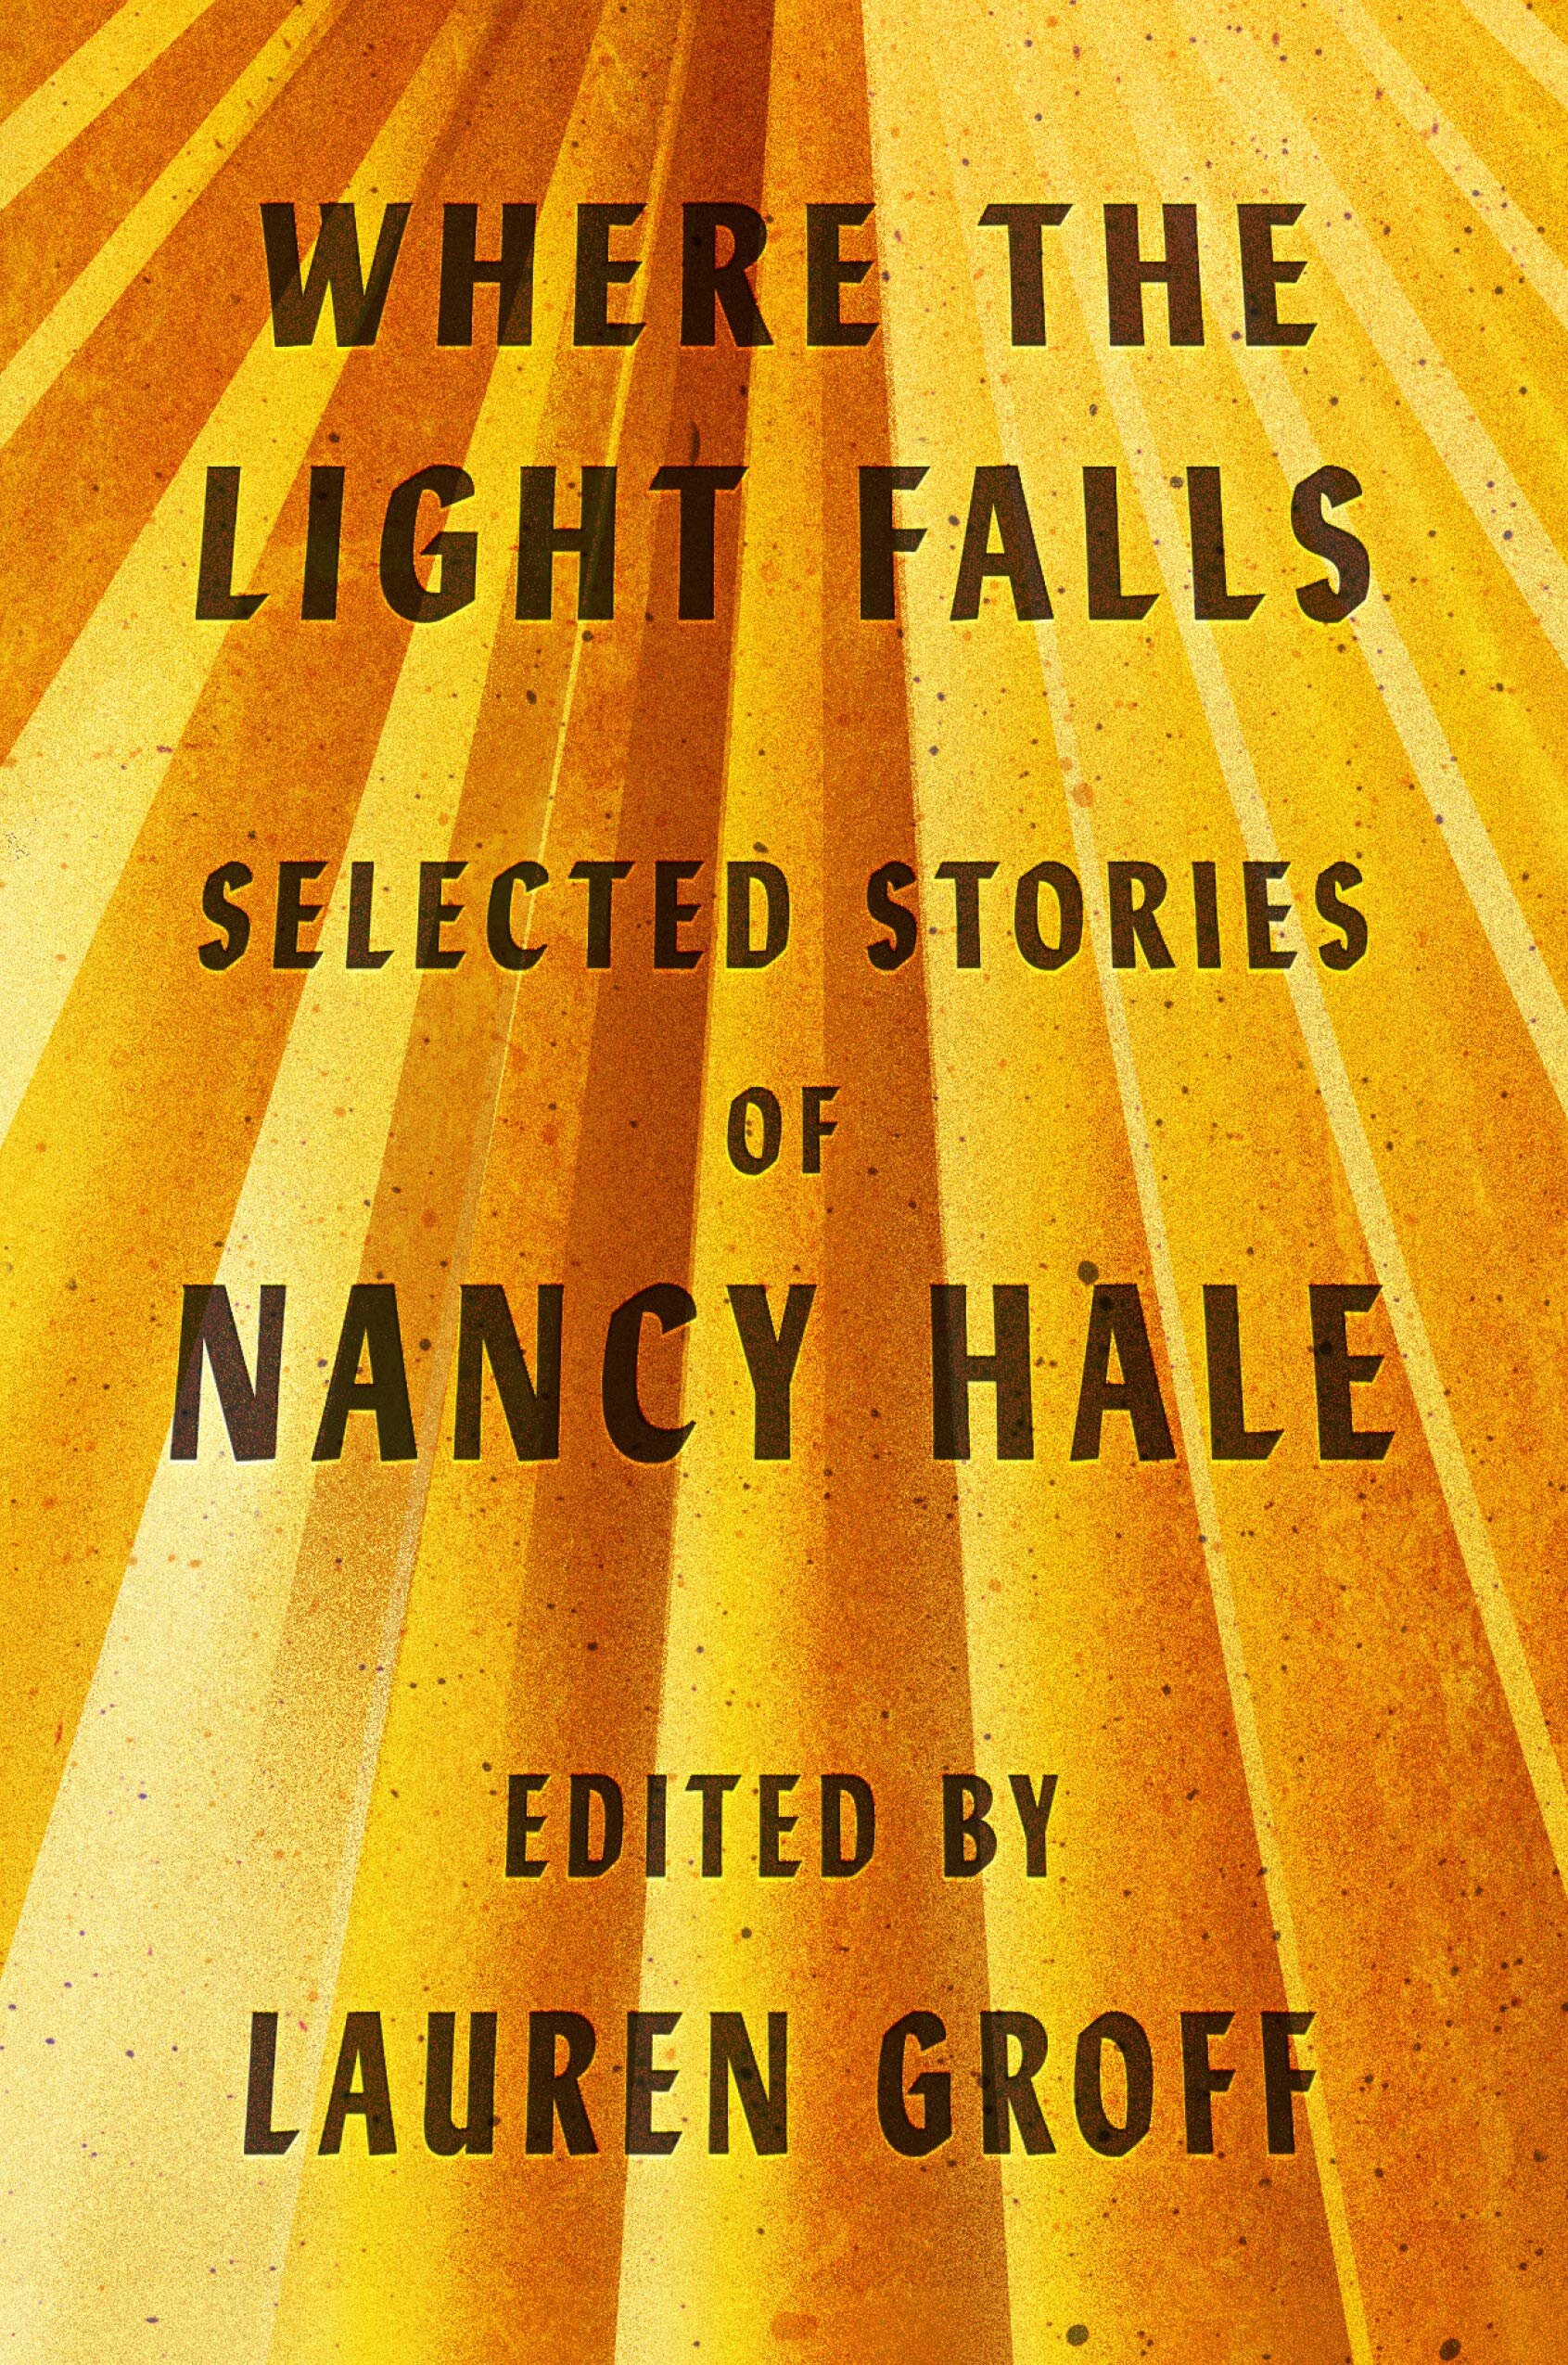 Reprints Where the Light Falls Selected Stories by Nancy Hale Edited by Lauren Groff.jpg